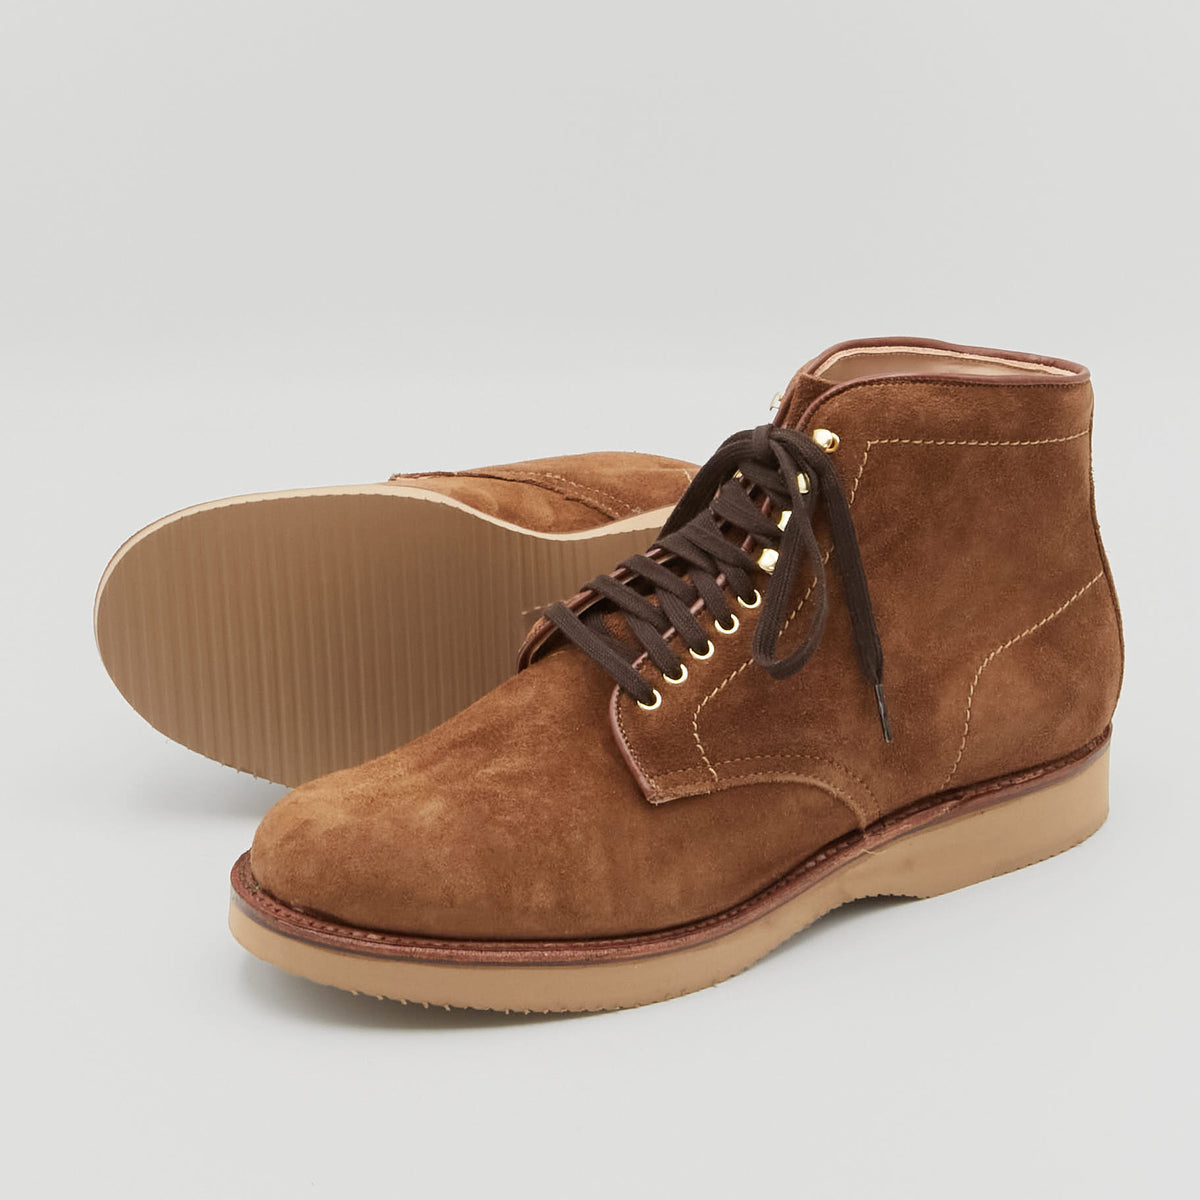 Alden Snuff Suede Lined Lace Up Boot